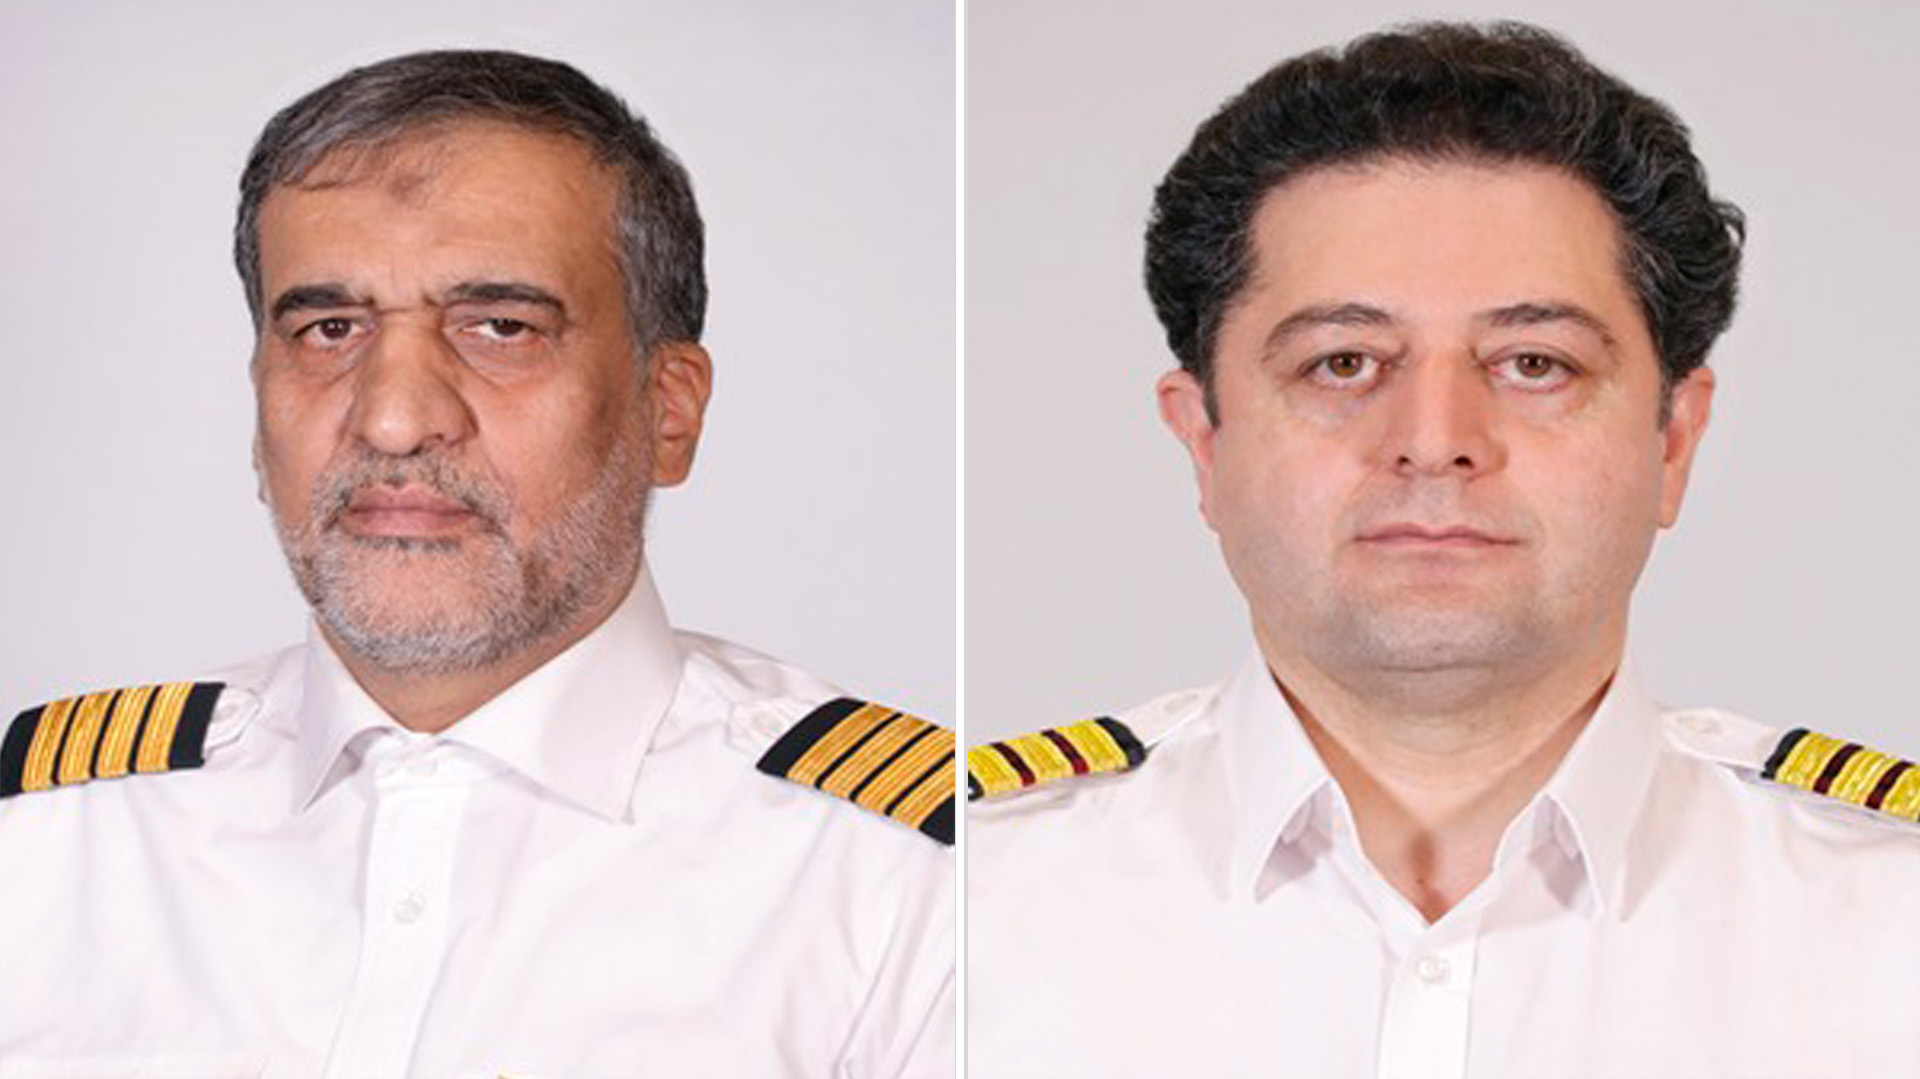 Judge Villena highlighted the trips to Damascus (Syria) of the pilot Gholamreza Ghasemi (in the photo on the left)